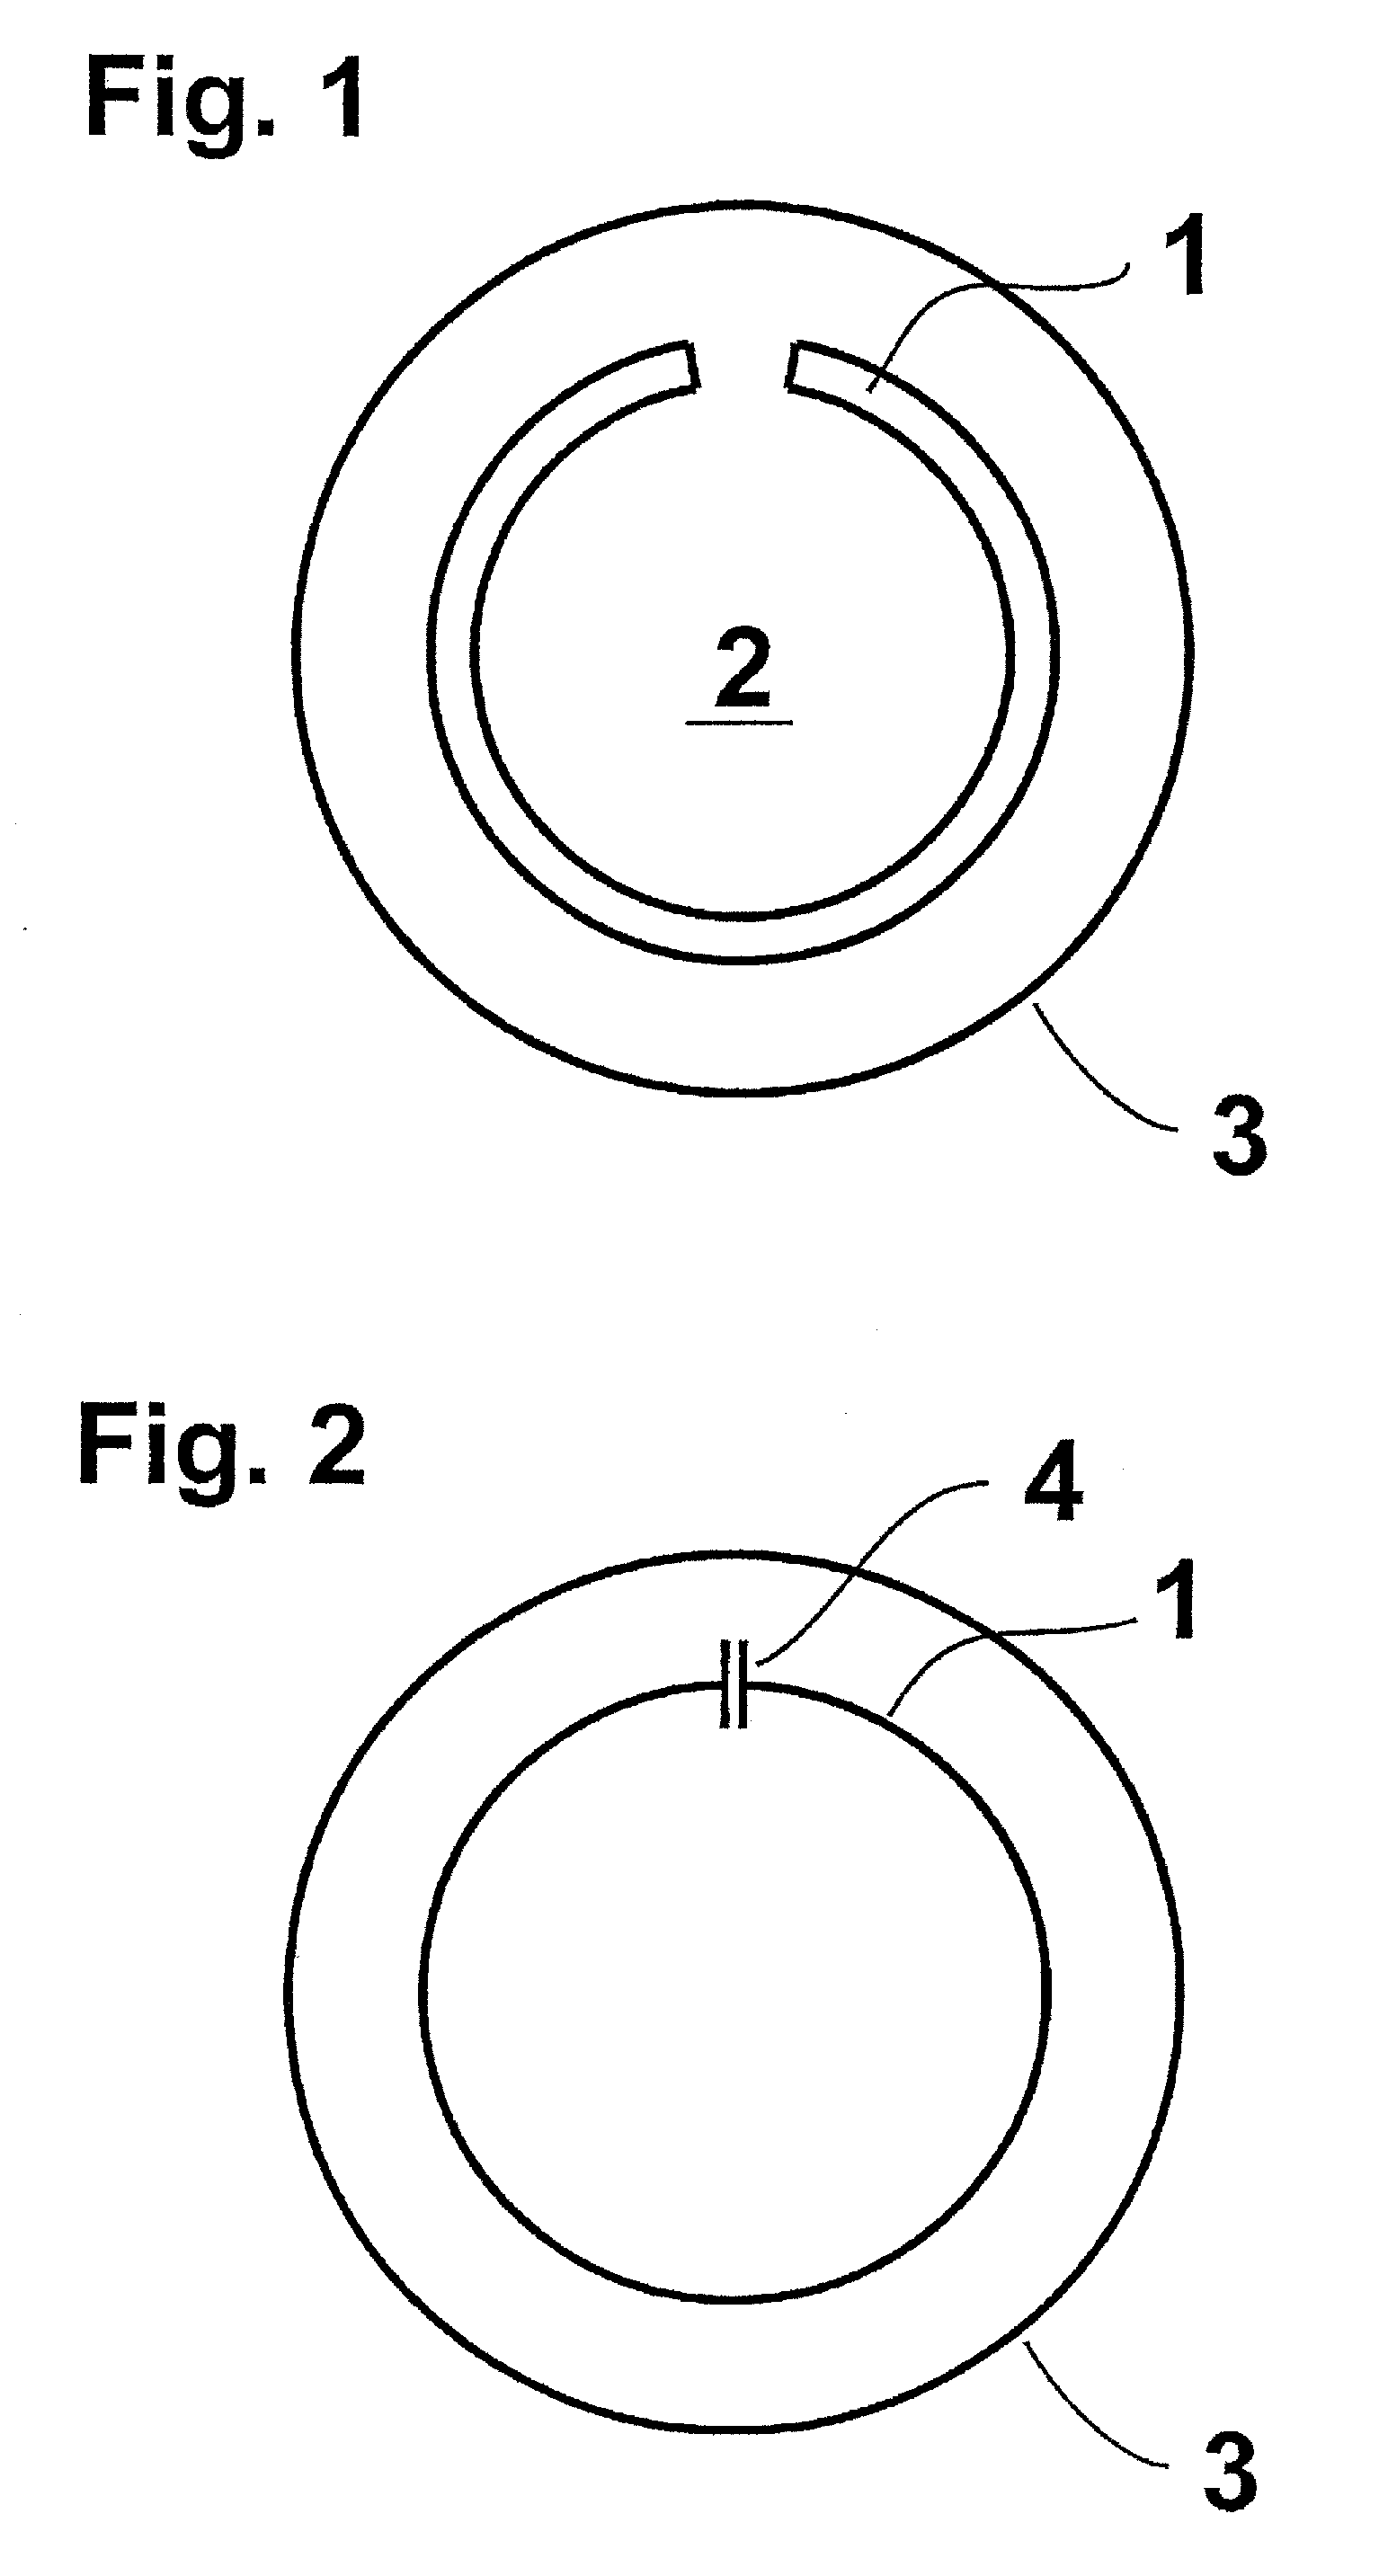 Coil array for magnetic resonance imaging with reduced coupling between adjacent coils